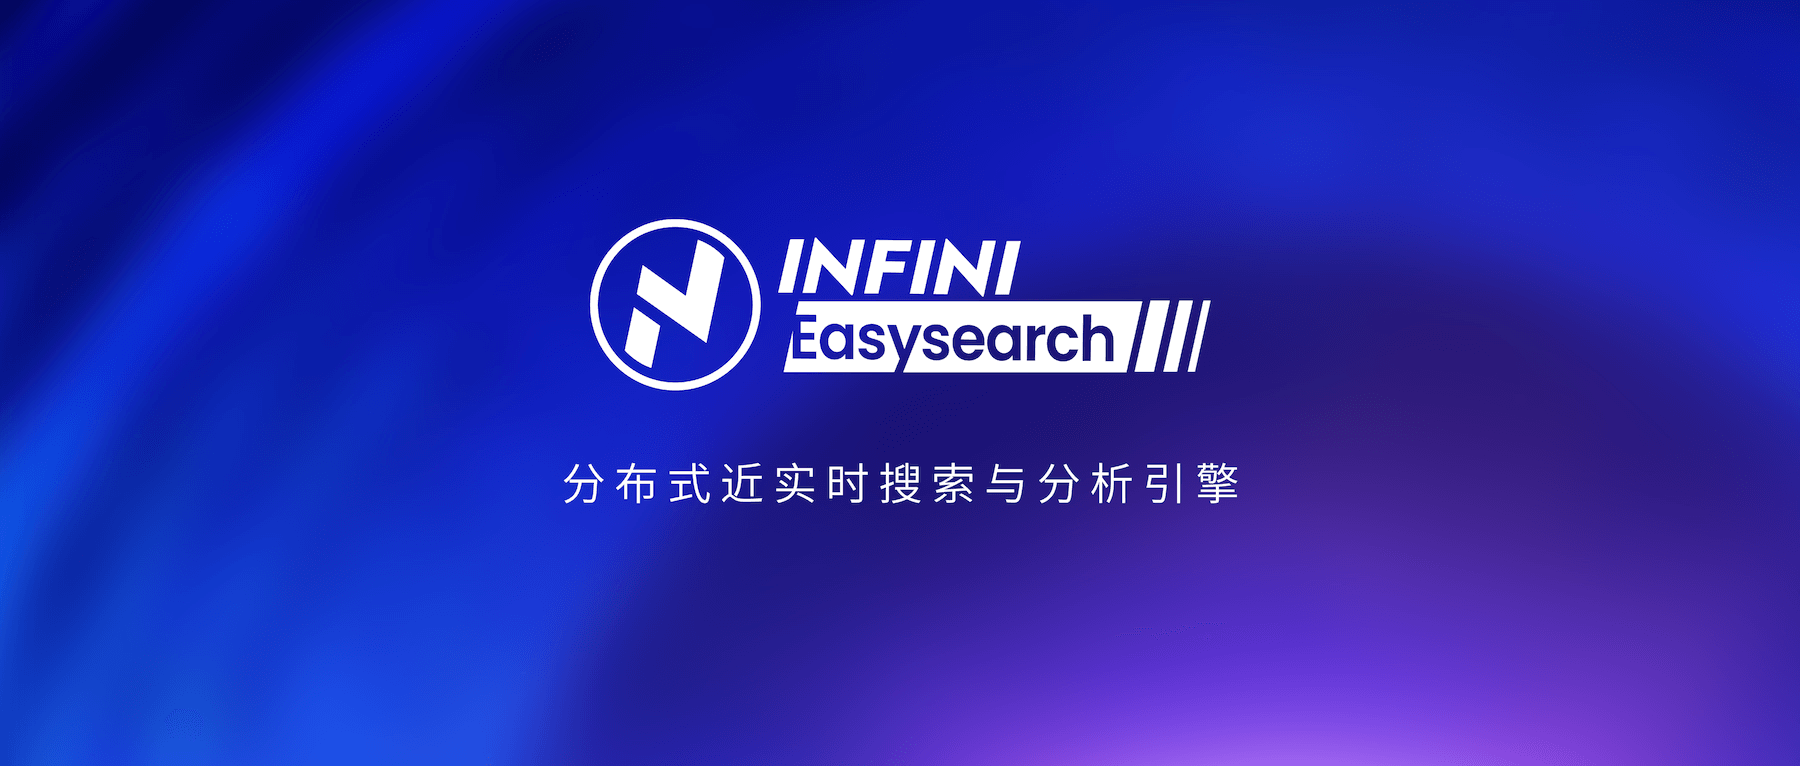 about easysearch